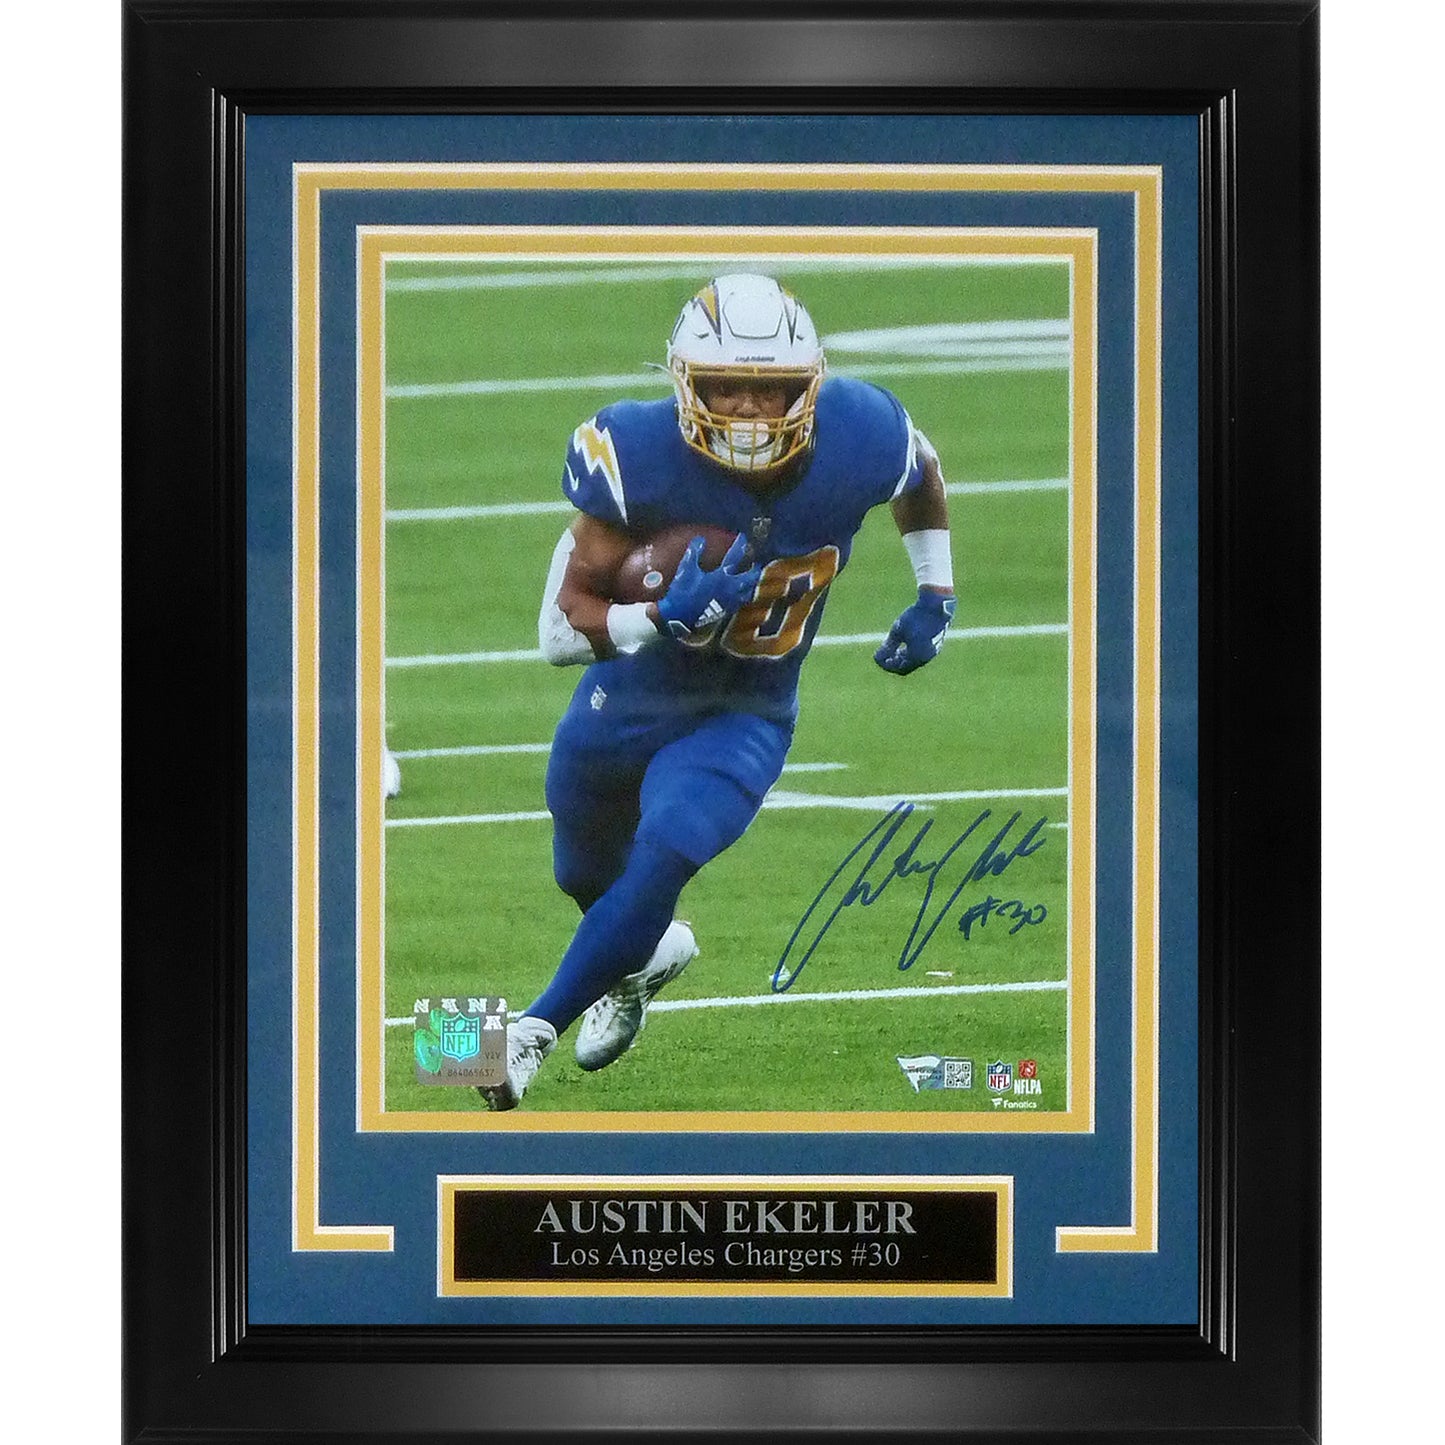 Austin Ekeler Autographed Los Angeles Chargers Deluxe Framed 8x10 Photo – Fanatics